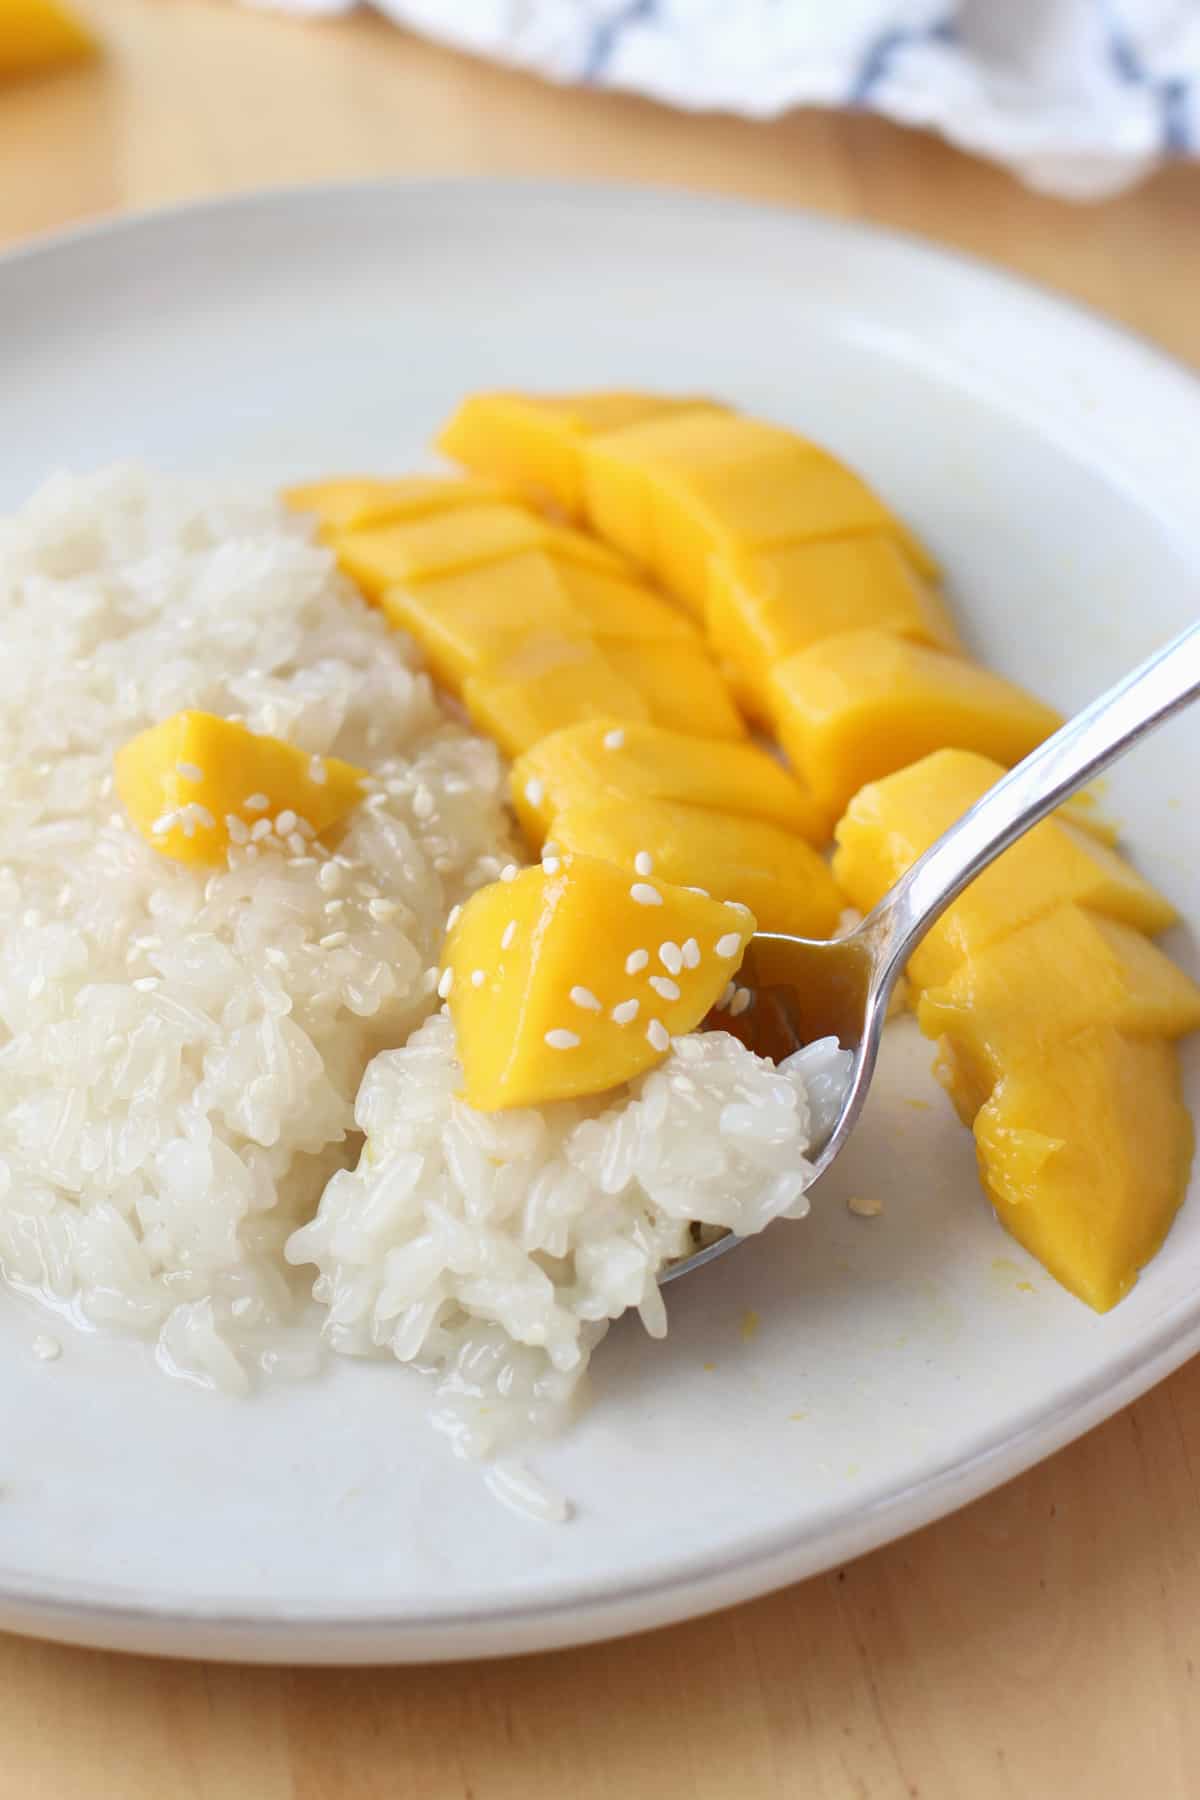 Using a spoon to grab a bite of sweet sticky rice with some mangoes on it